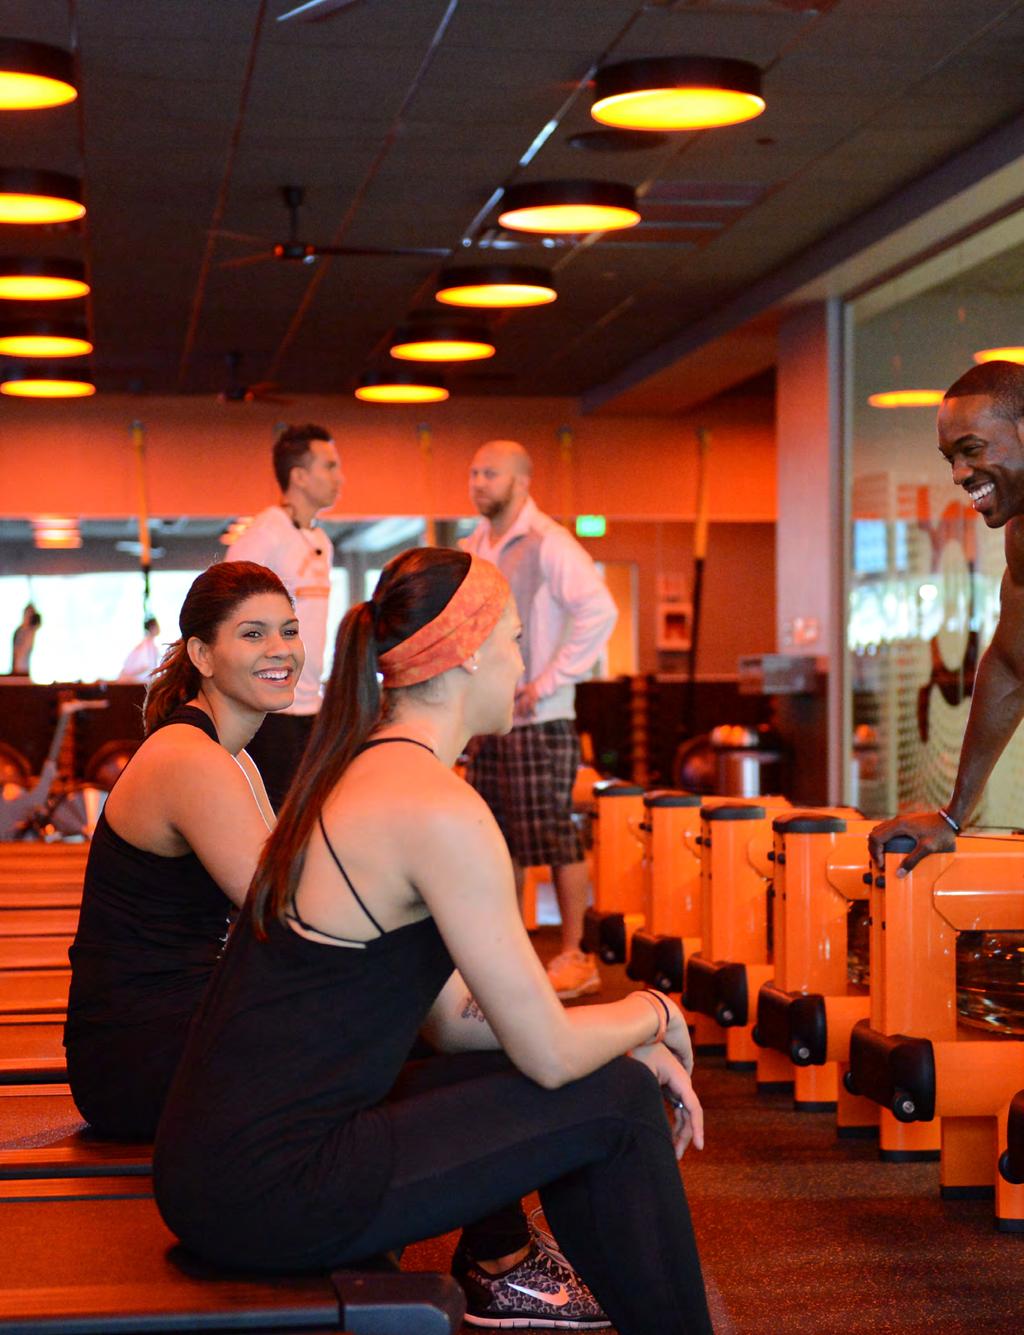 Led by skilled personal trainers, participants use a variety of equipment including treadmills, rowing machines, TRX suspension training and free weights, burning an average of 500-1,000 calories